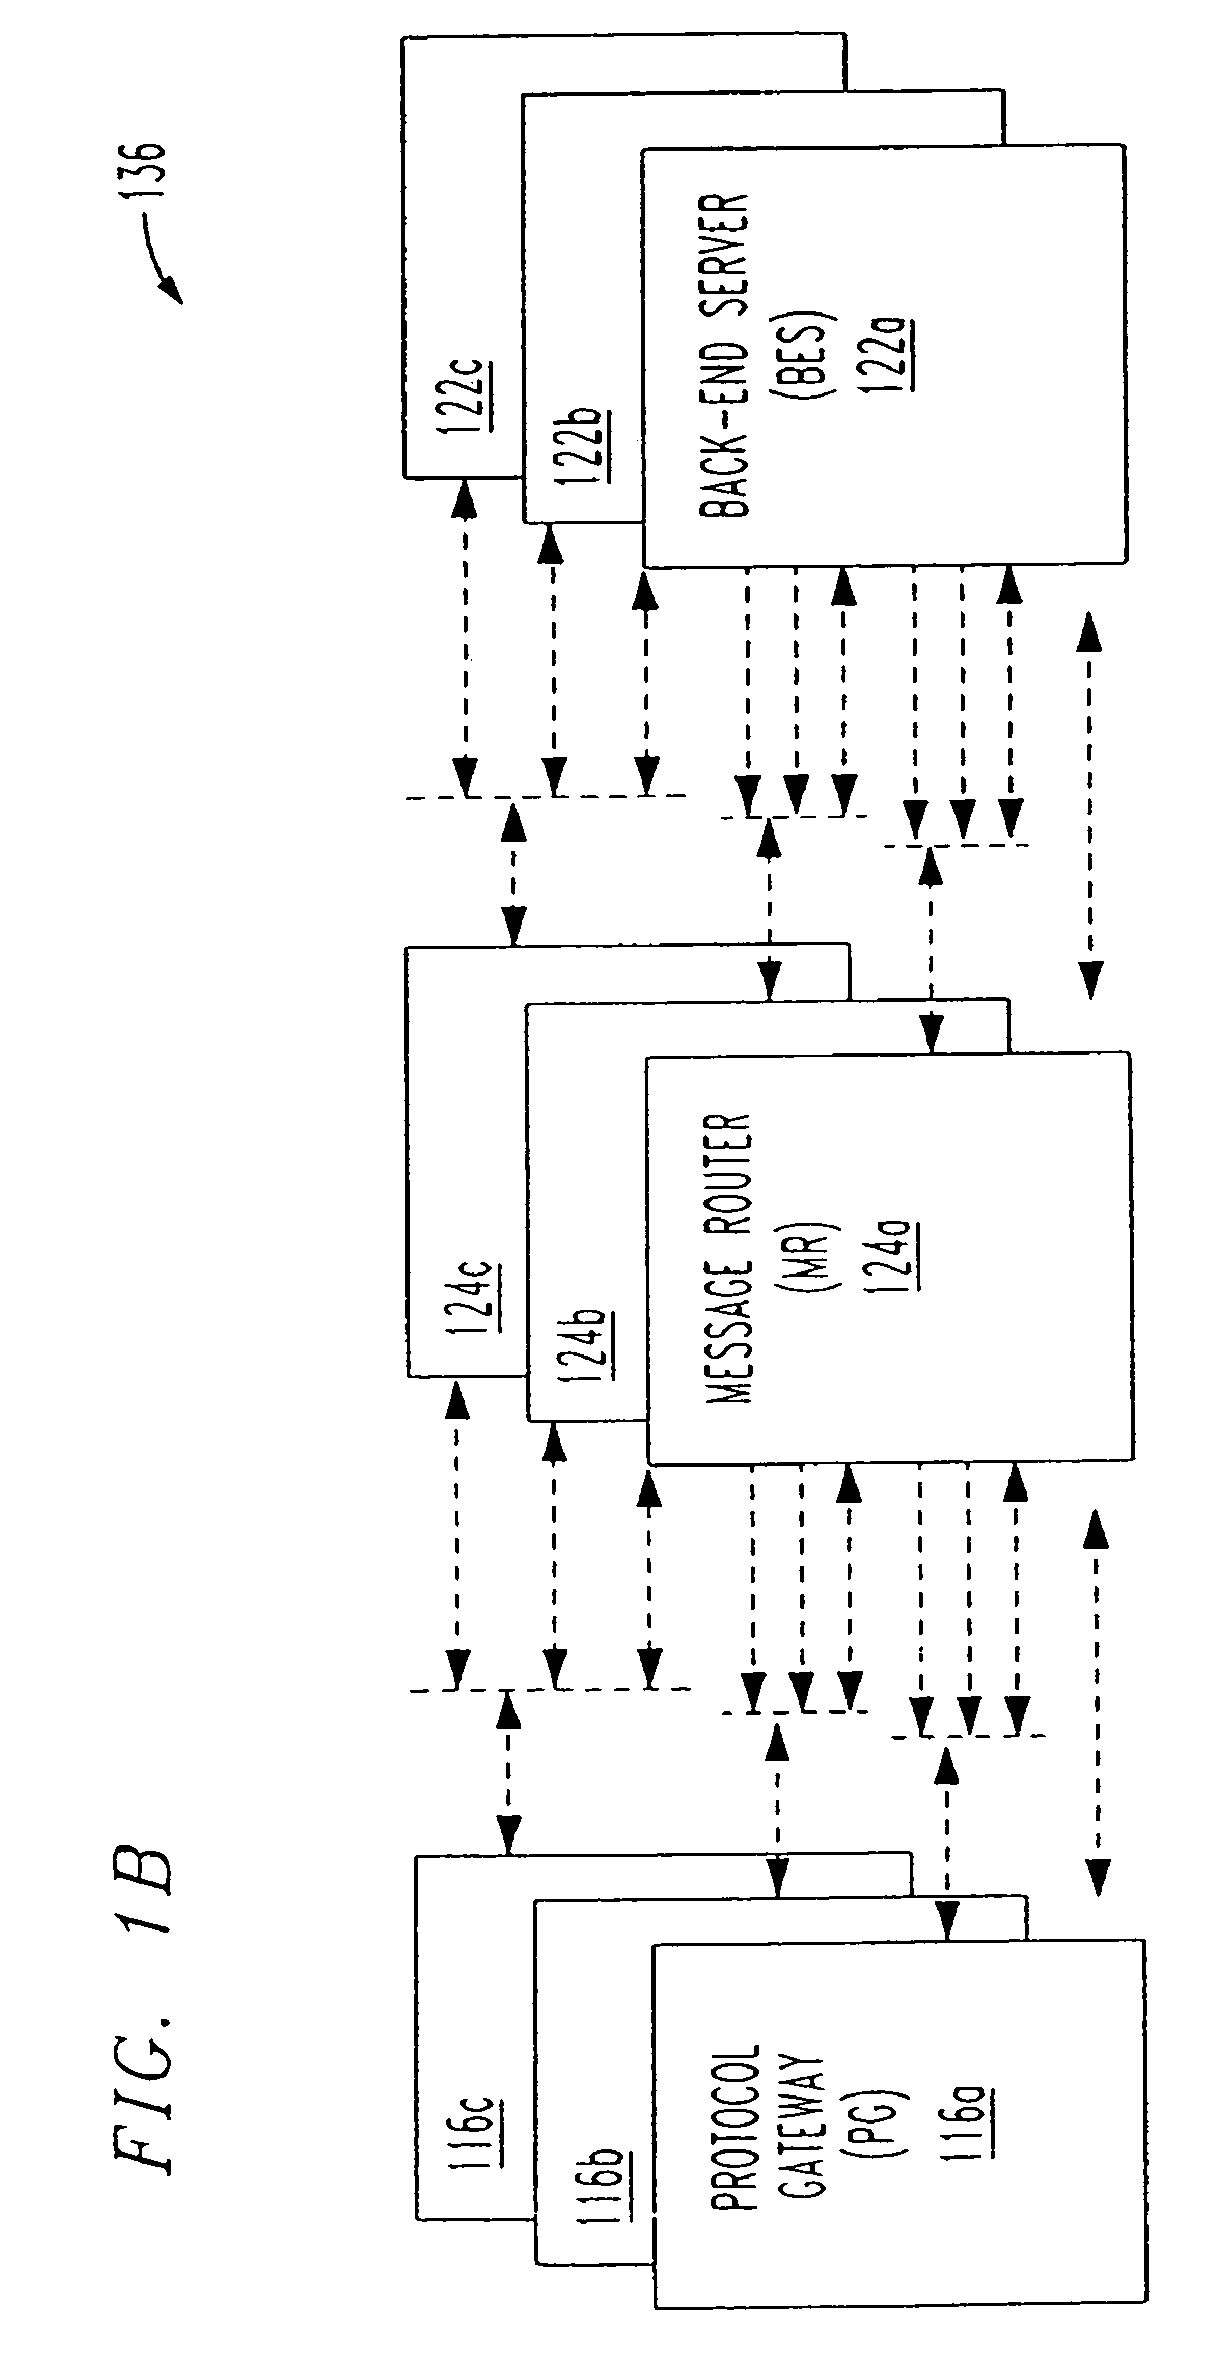 System and method to publish information from servers to remote monitor devices